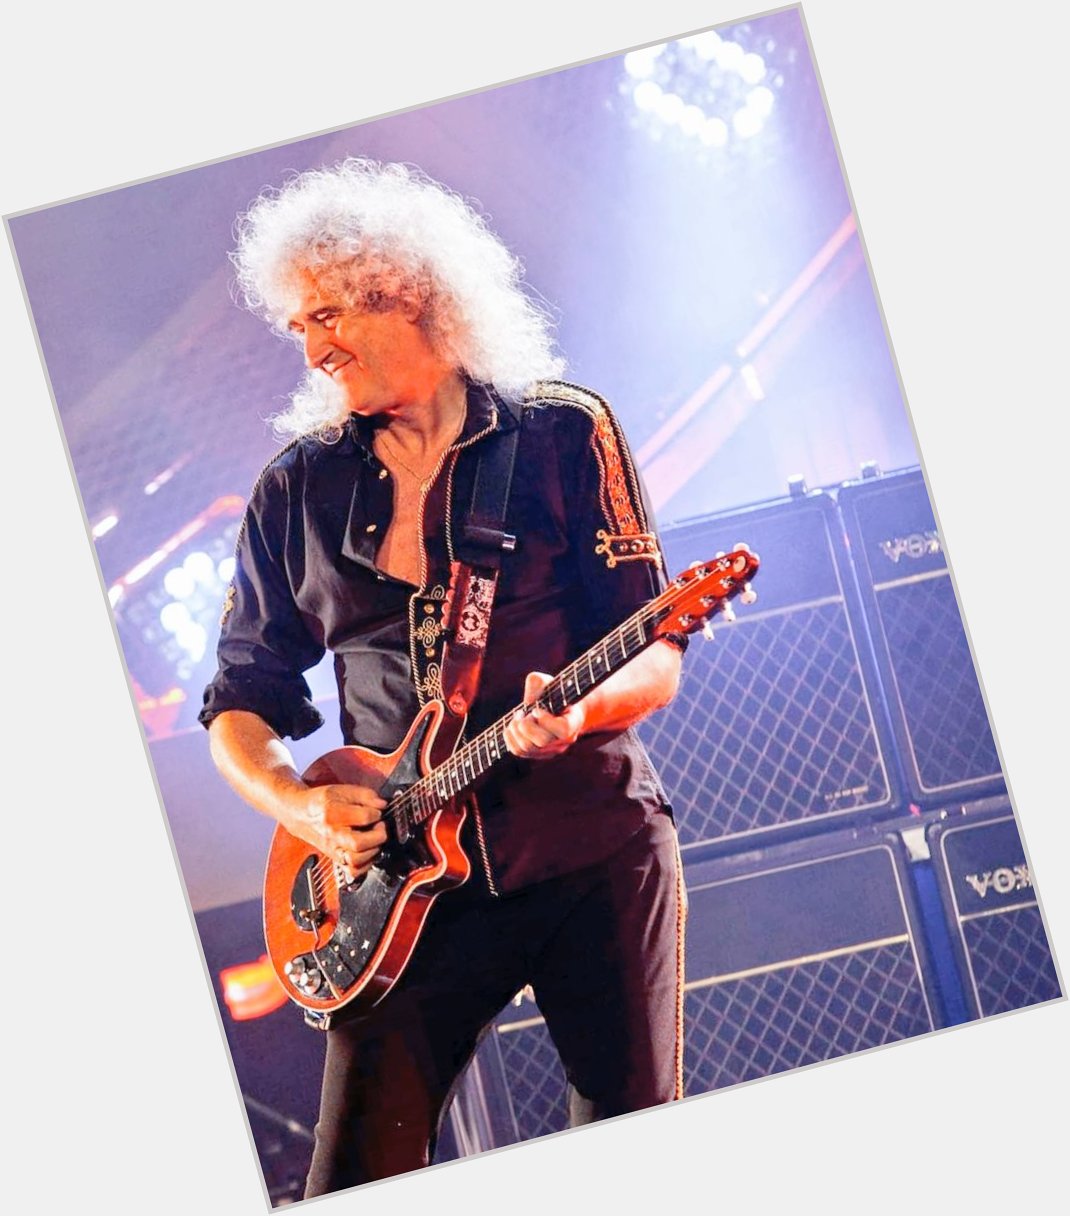   Wishing a very happy 75th birthday to the absolute rocklegend Brian May! 